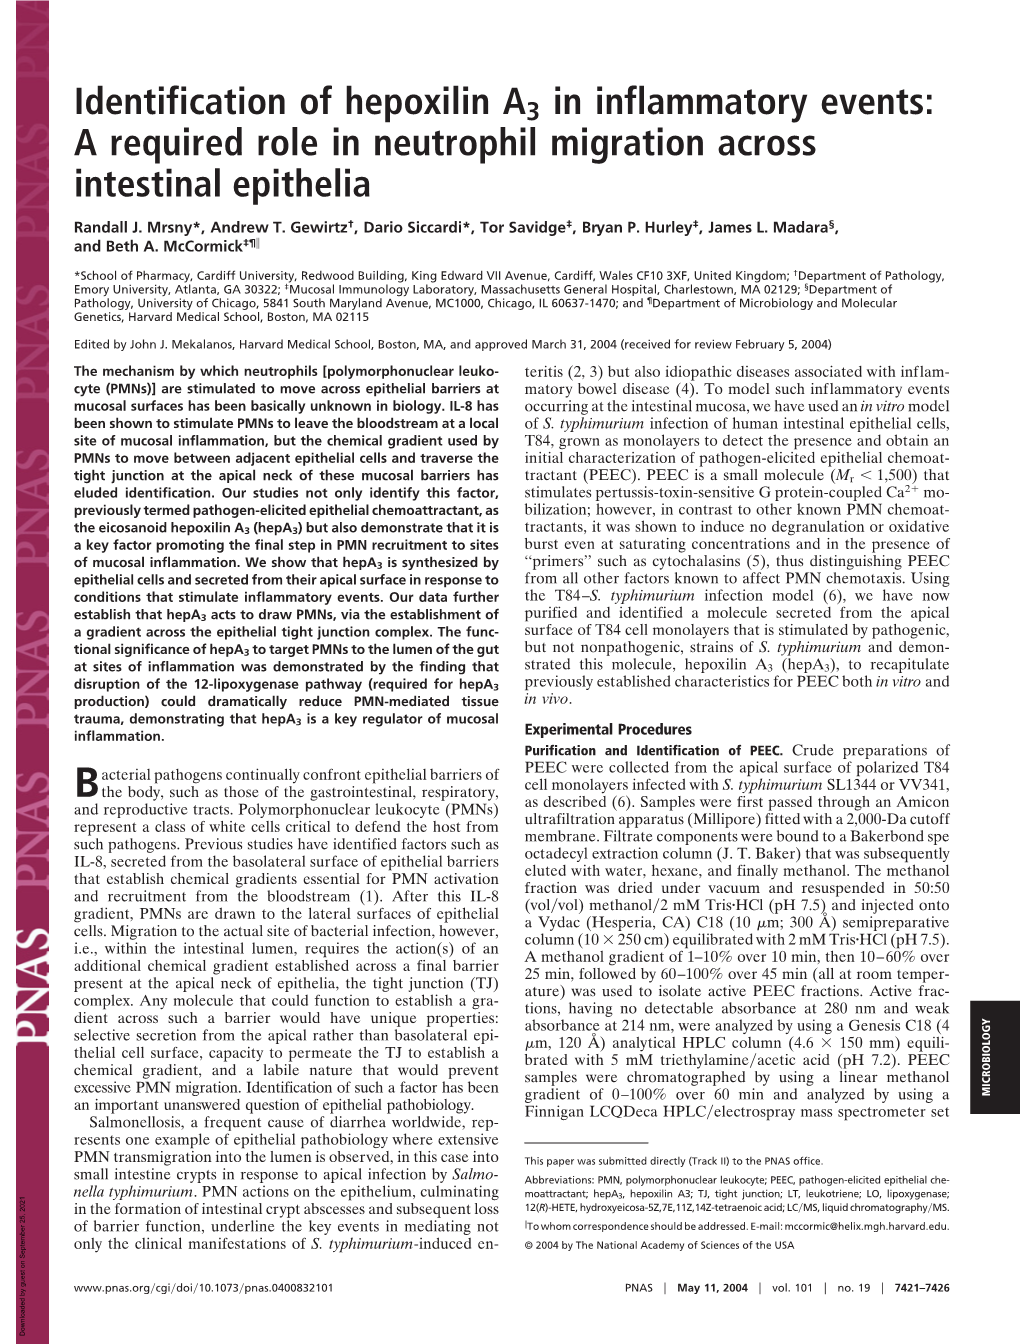 Identification of Hepoxilin A3 in Inflammatory Events: a Required Role in Neutrophil Migration Across Intestinal Epithelia